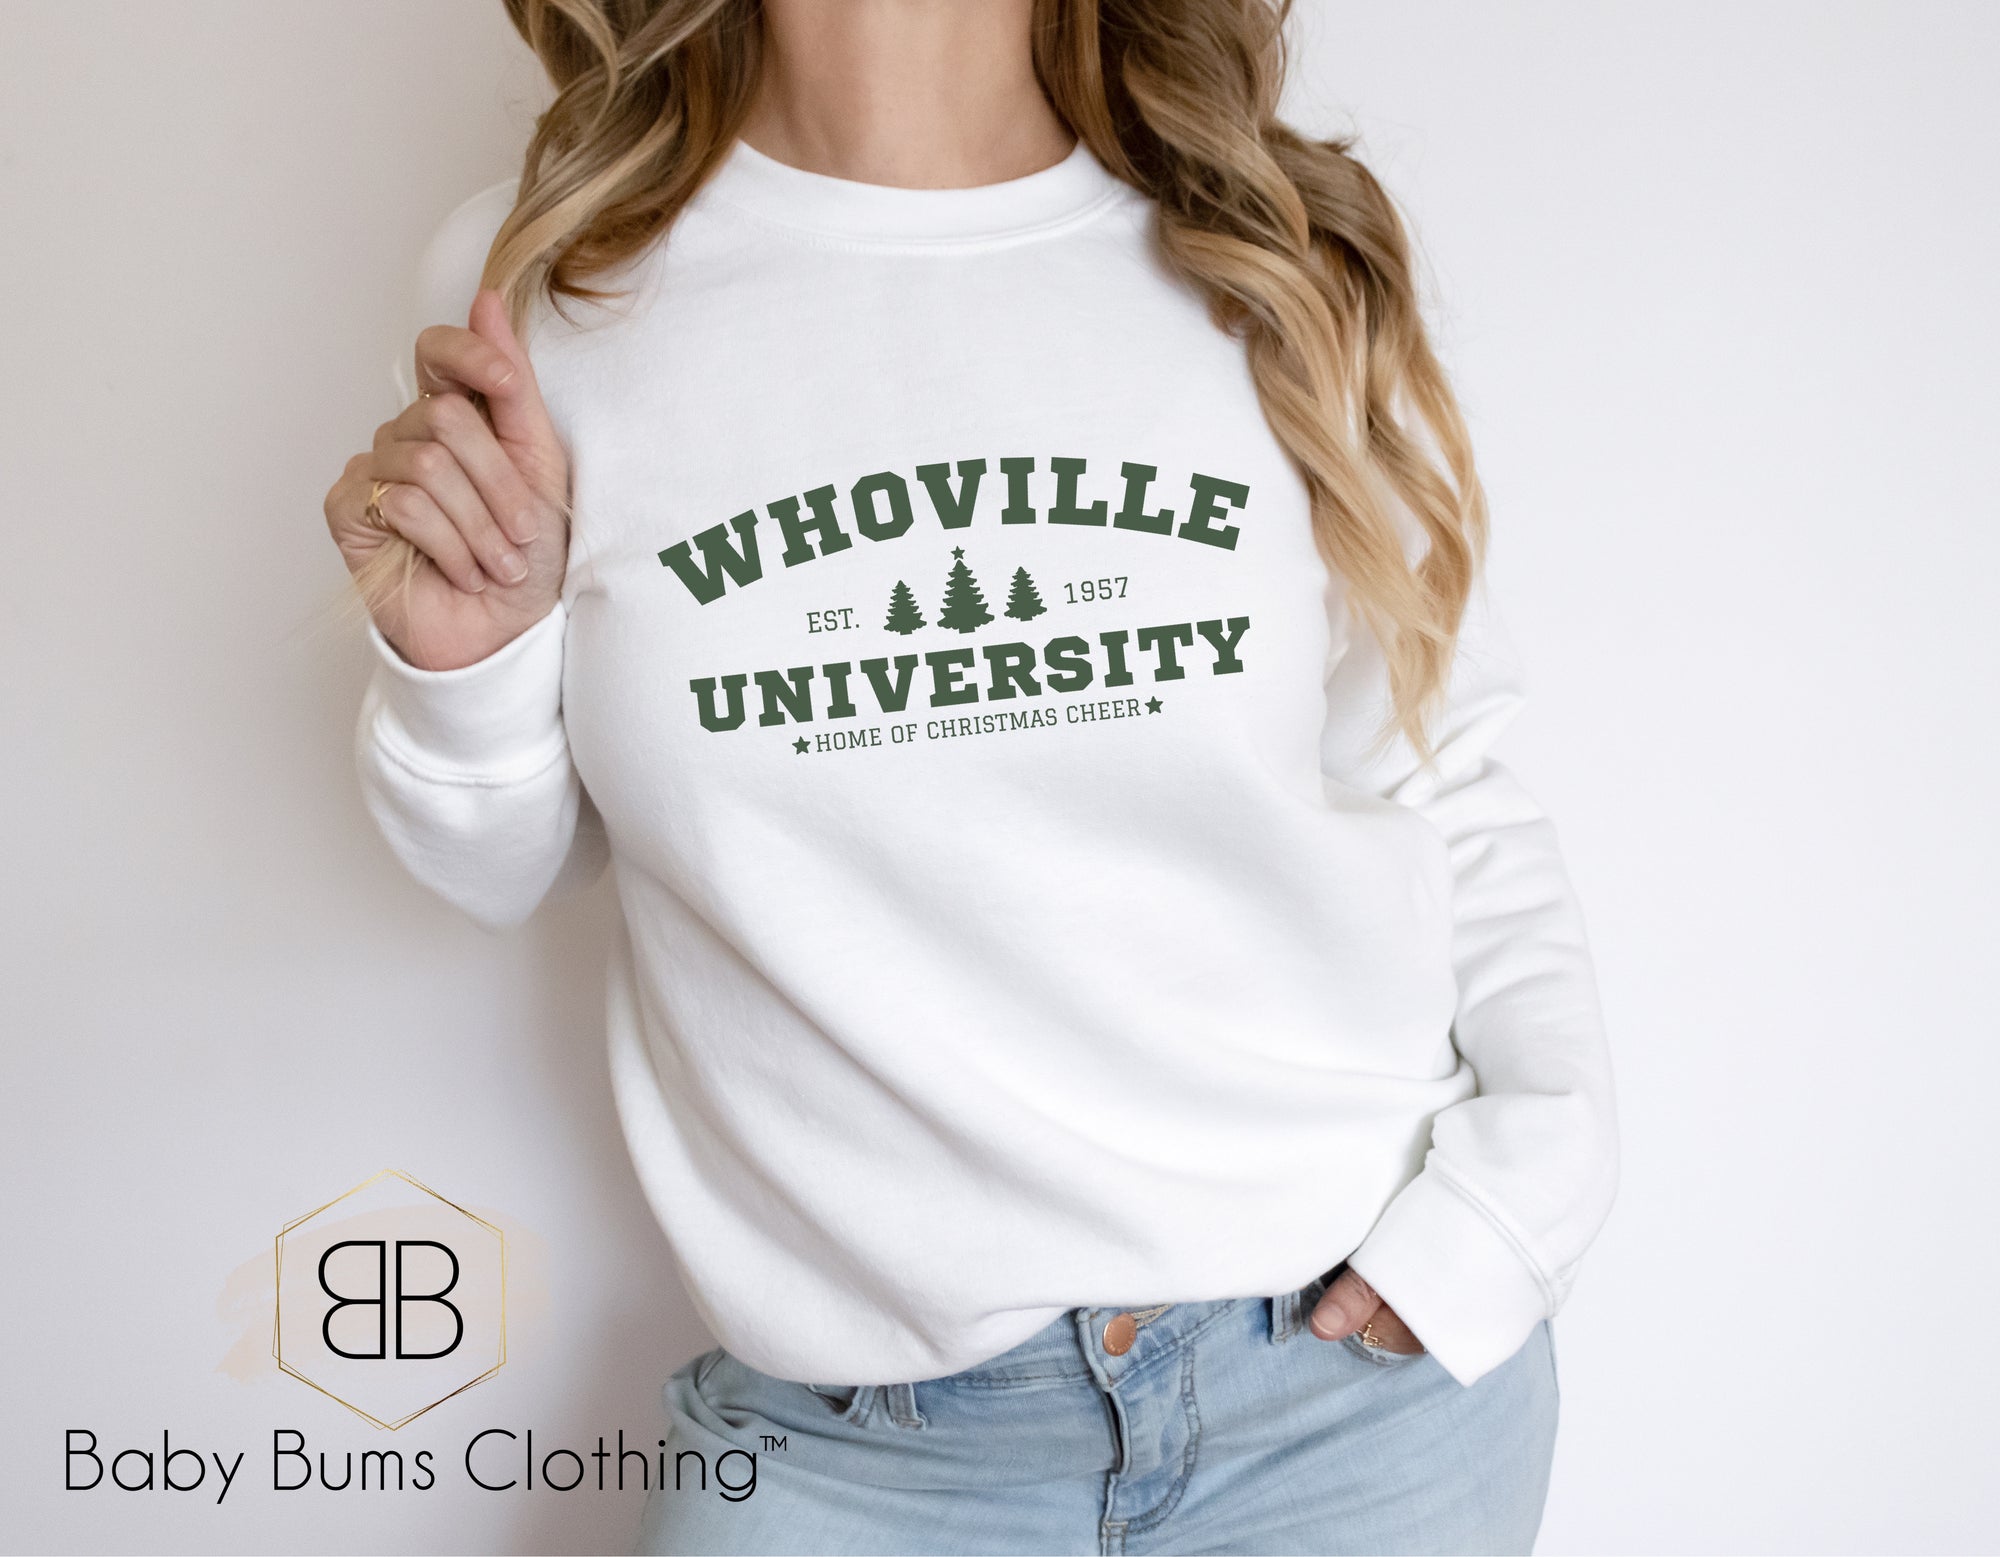 WHOVILLE UNIVERSITY IN GREEN ADULT UNISEX T-SHIRT - Baby Bums Clothing 